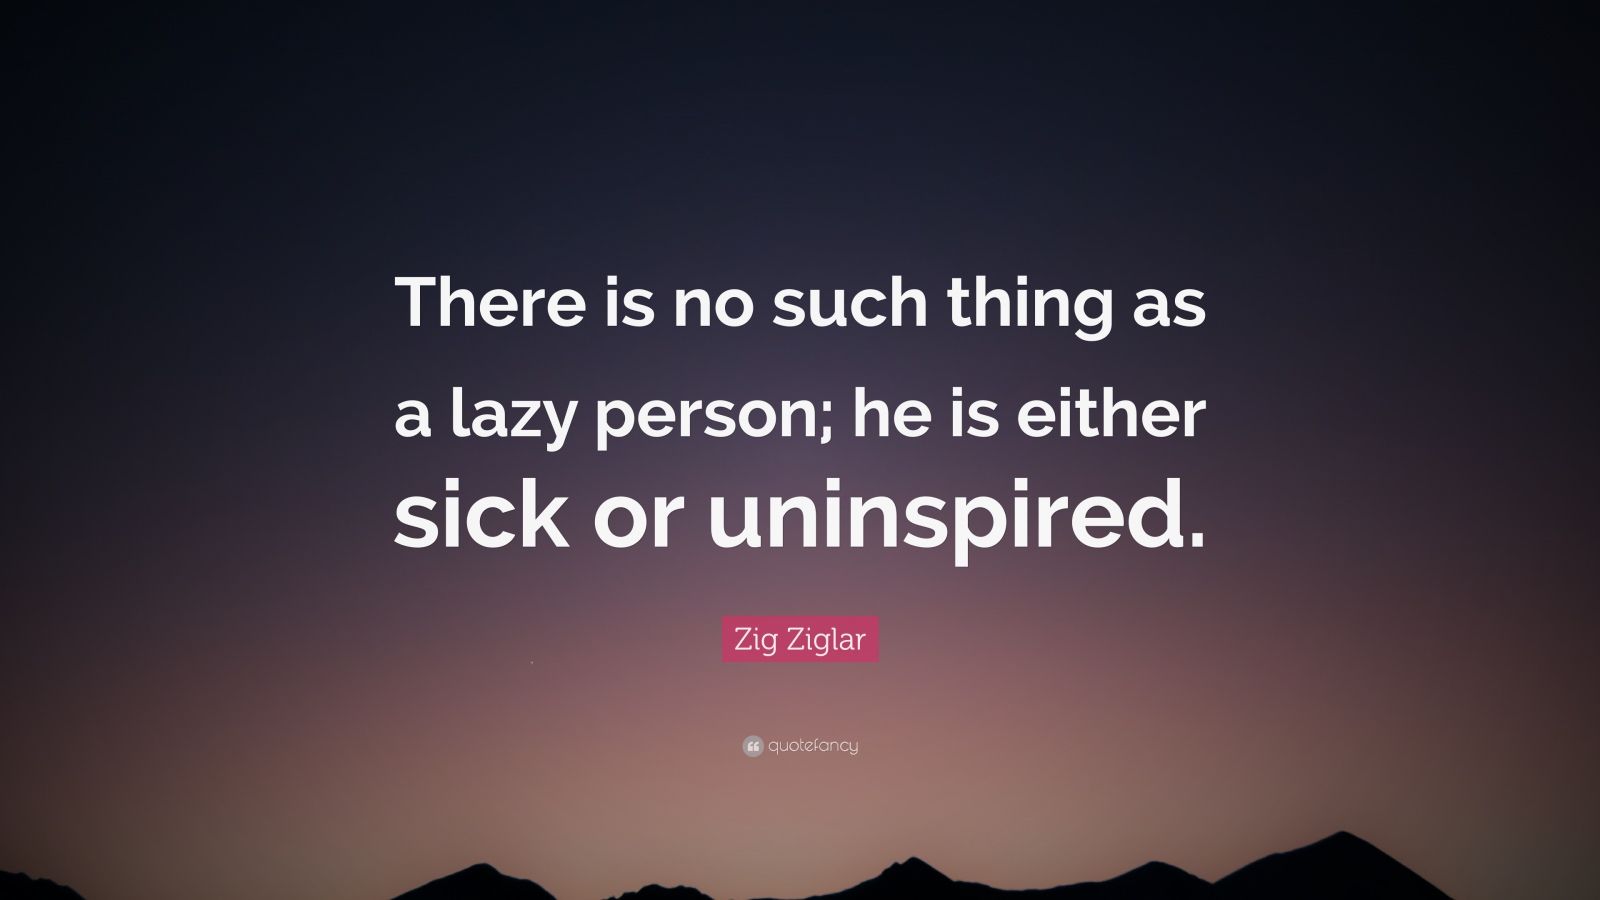 Zig Ziglar Quote: “There is no such thing as a lazy person; he is